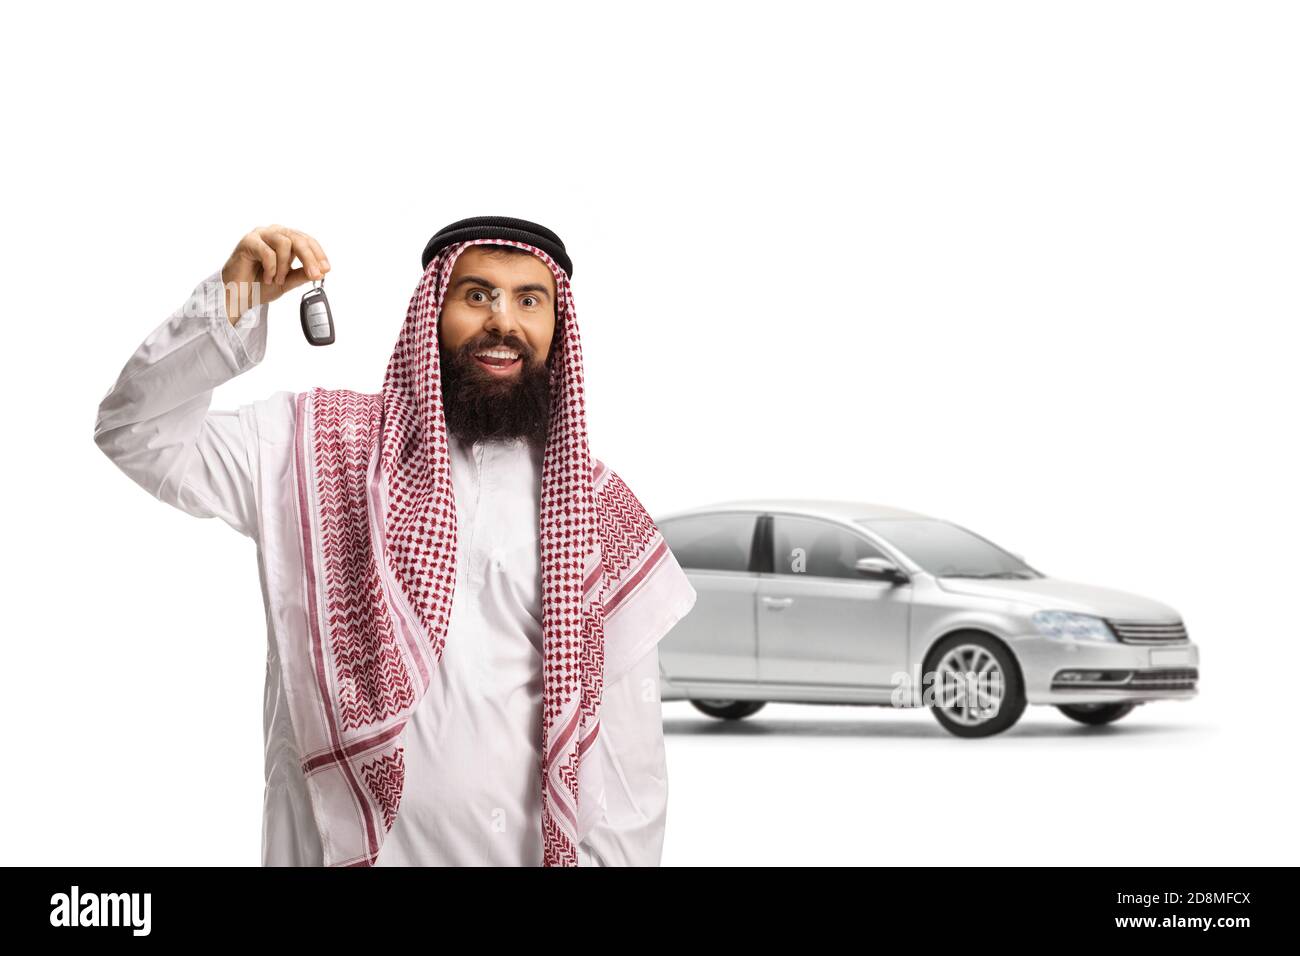 Arab man with a silver car showing car keys isolated on white background Stock Photo